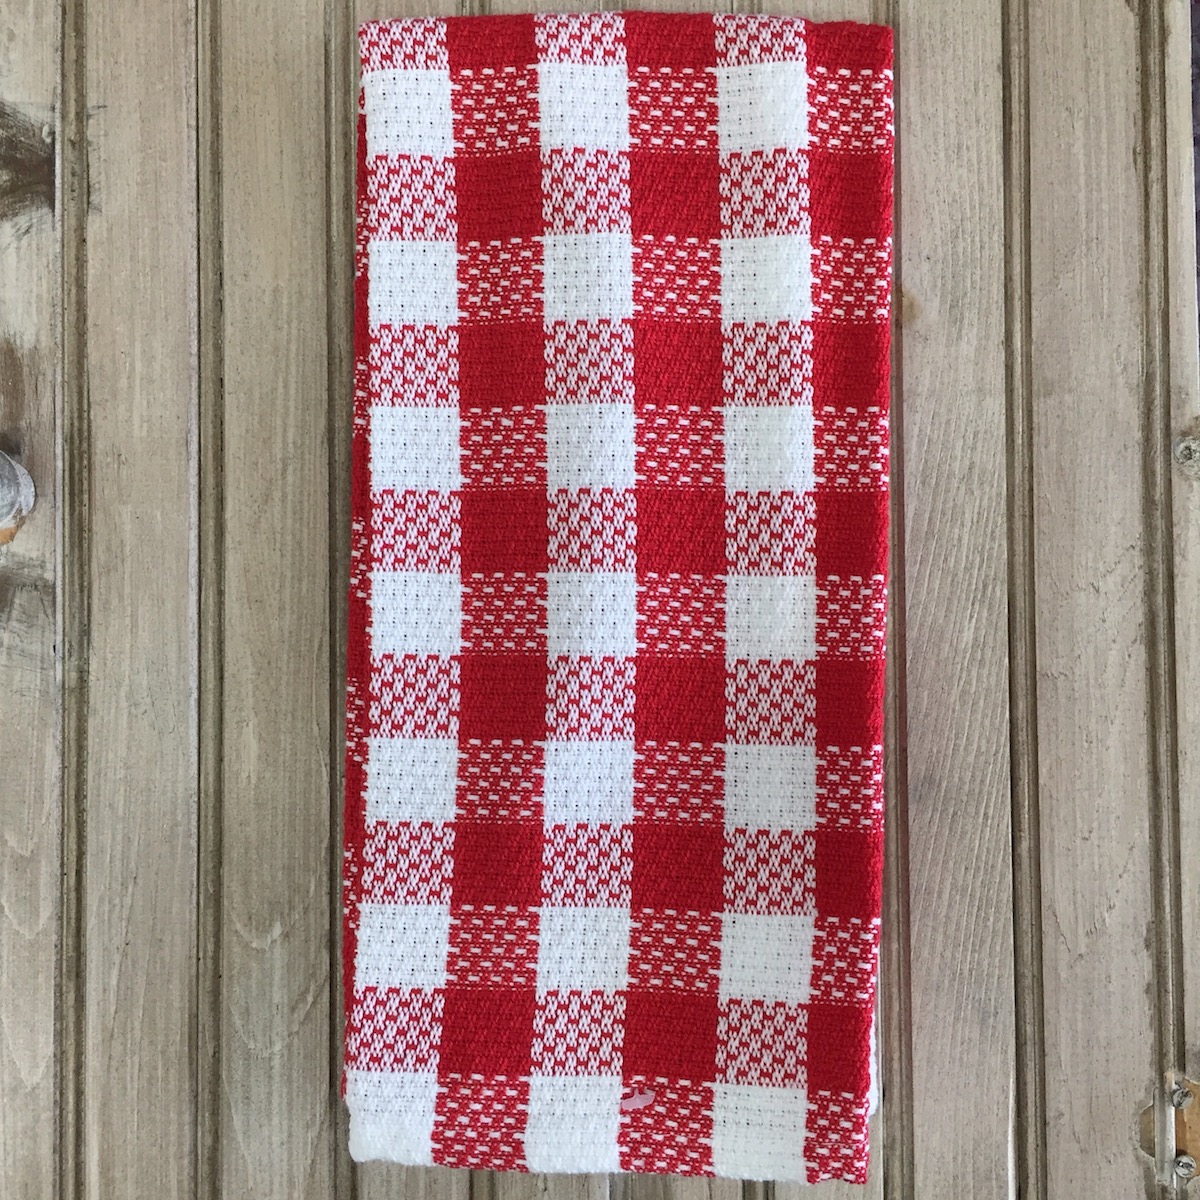 Farmhouse Kitchen Towels Antique Burgundy & Natural Tan, Striped Buffalo  Checked Plaid Dish Towels, 3 Kitchen Towels 